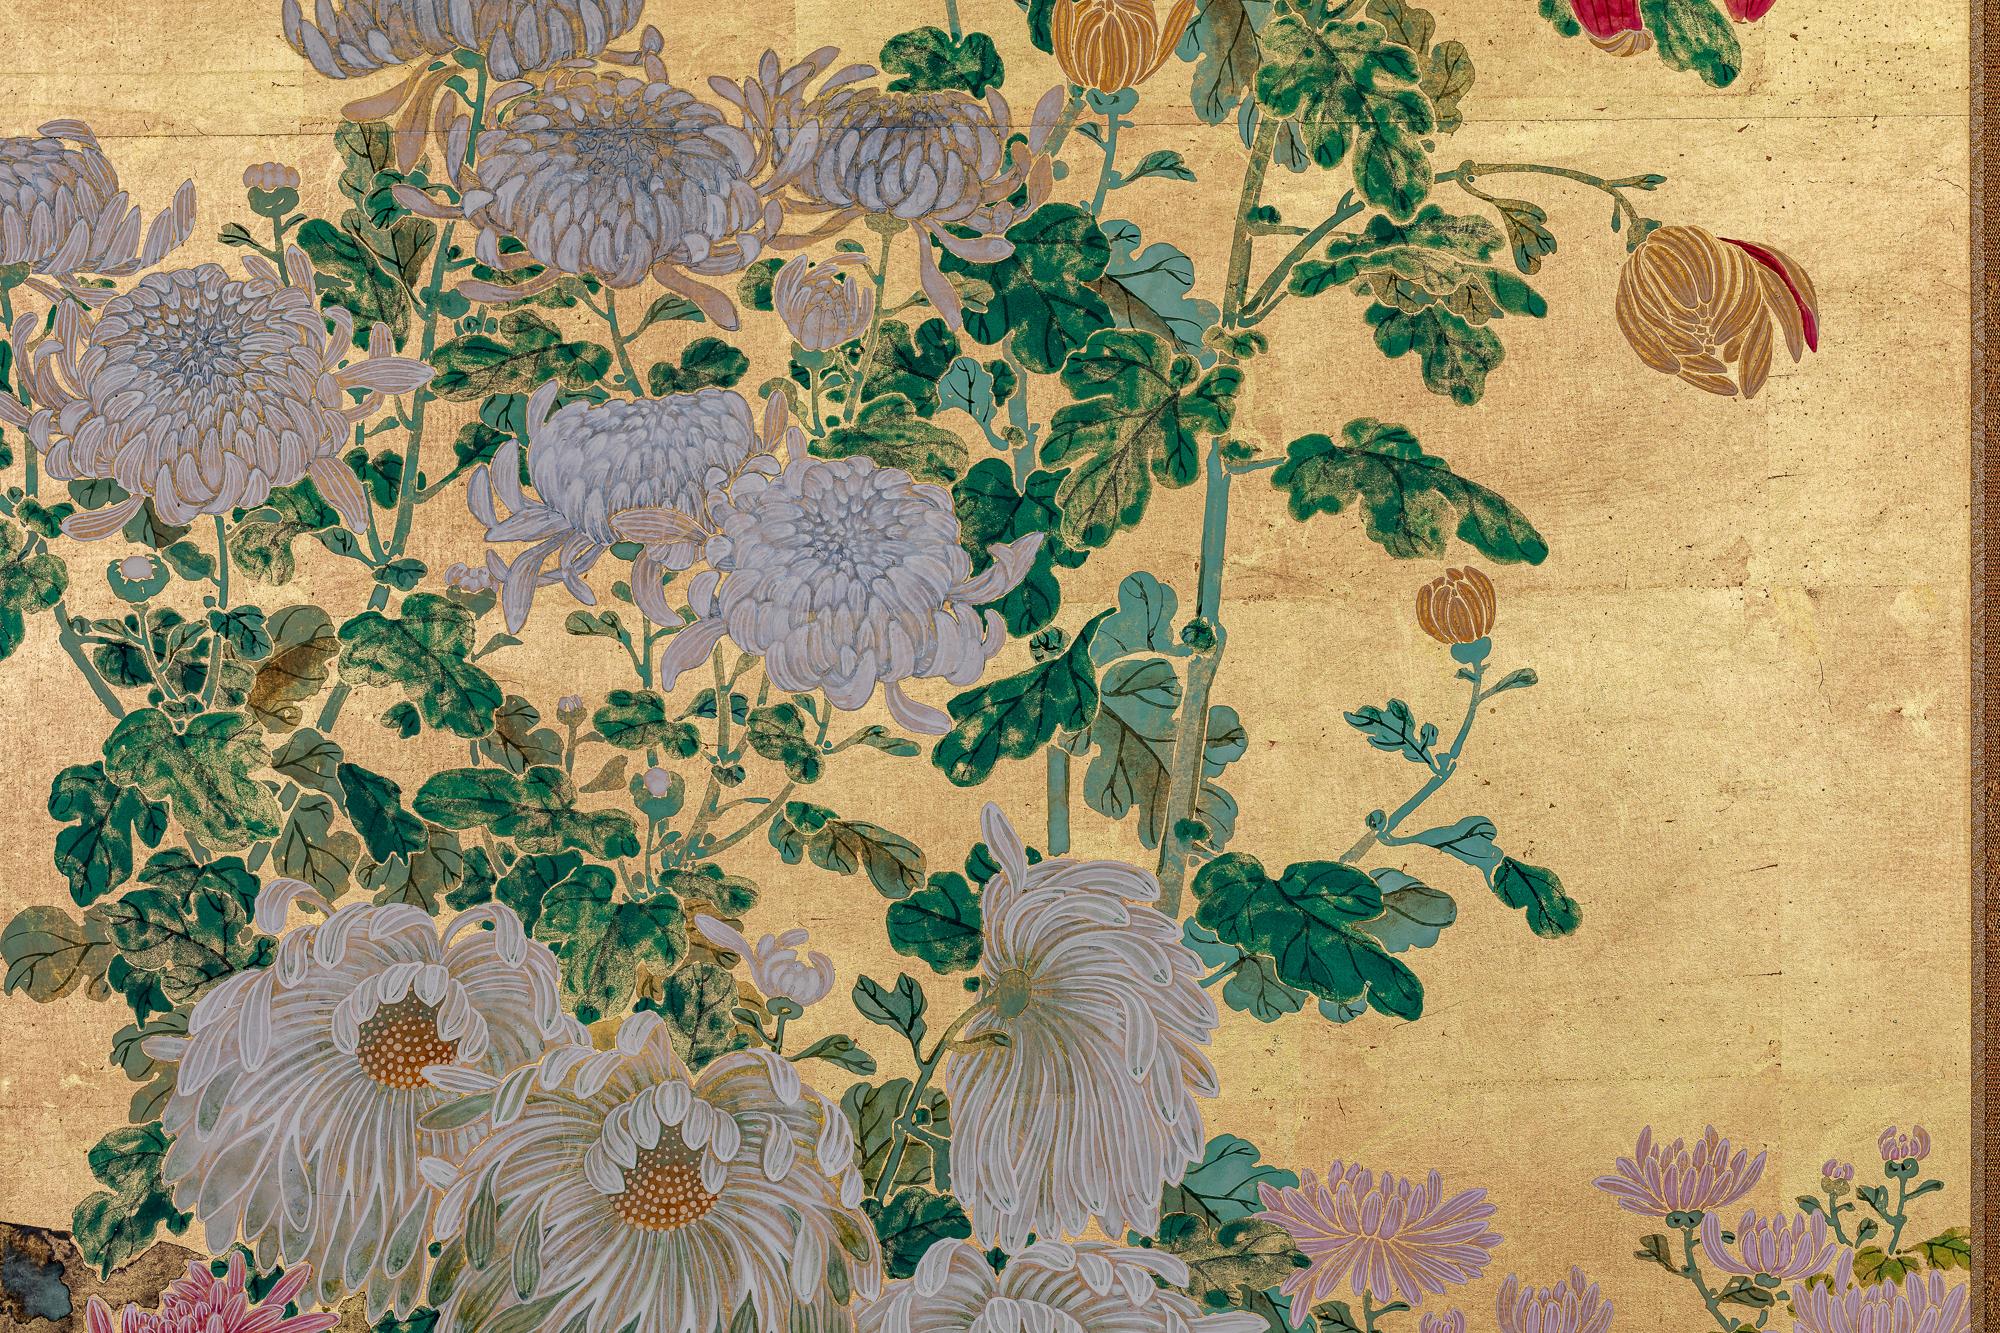 Paper Japanese Two Panel Screen: Chrysanthemums on Gold Leaf